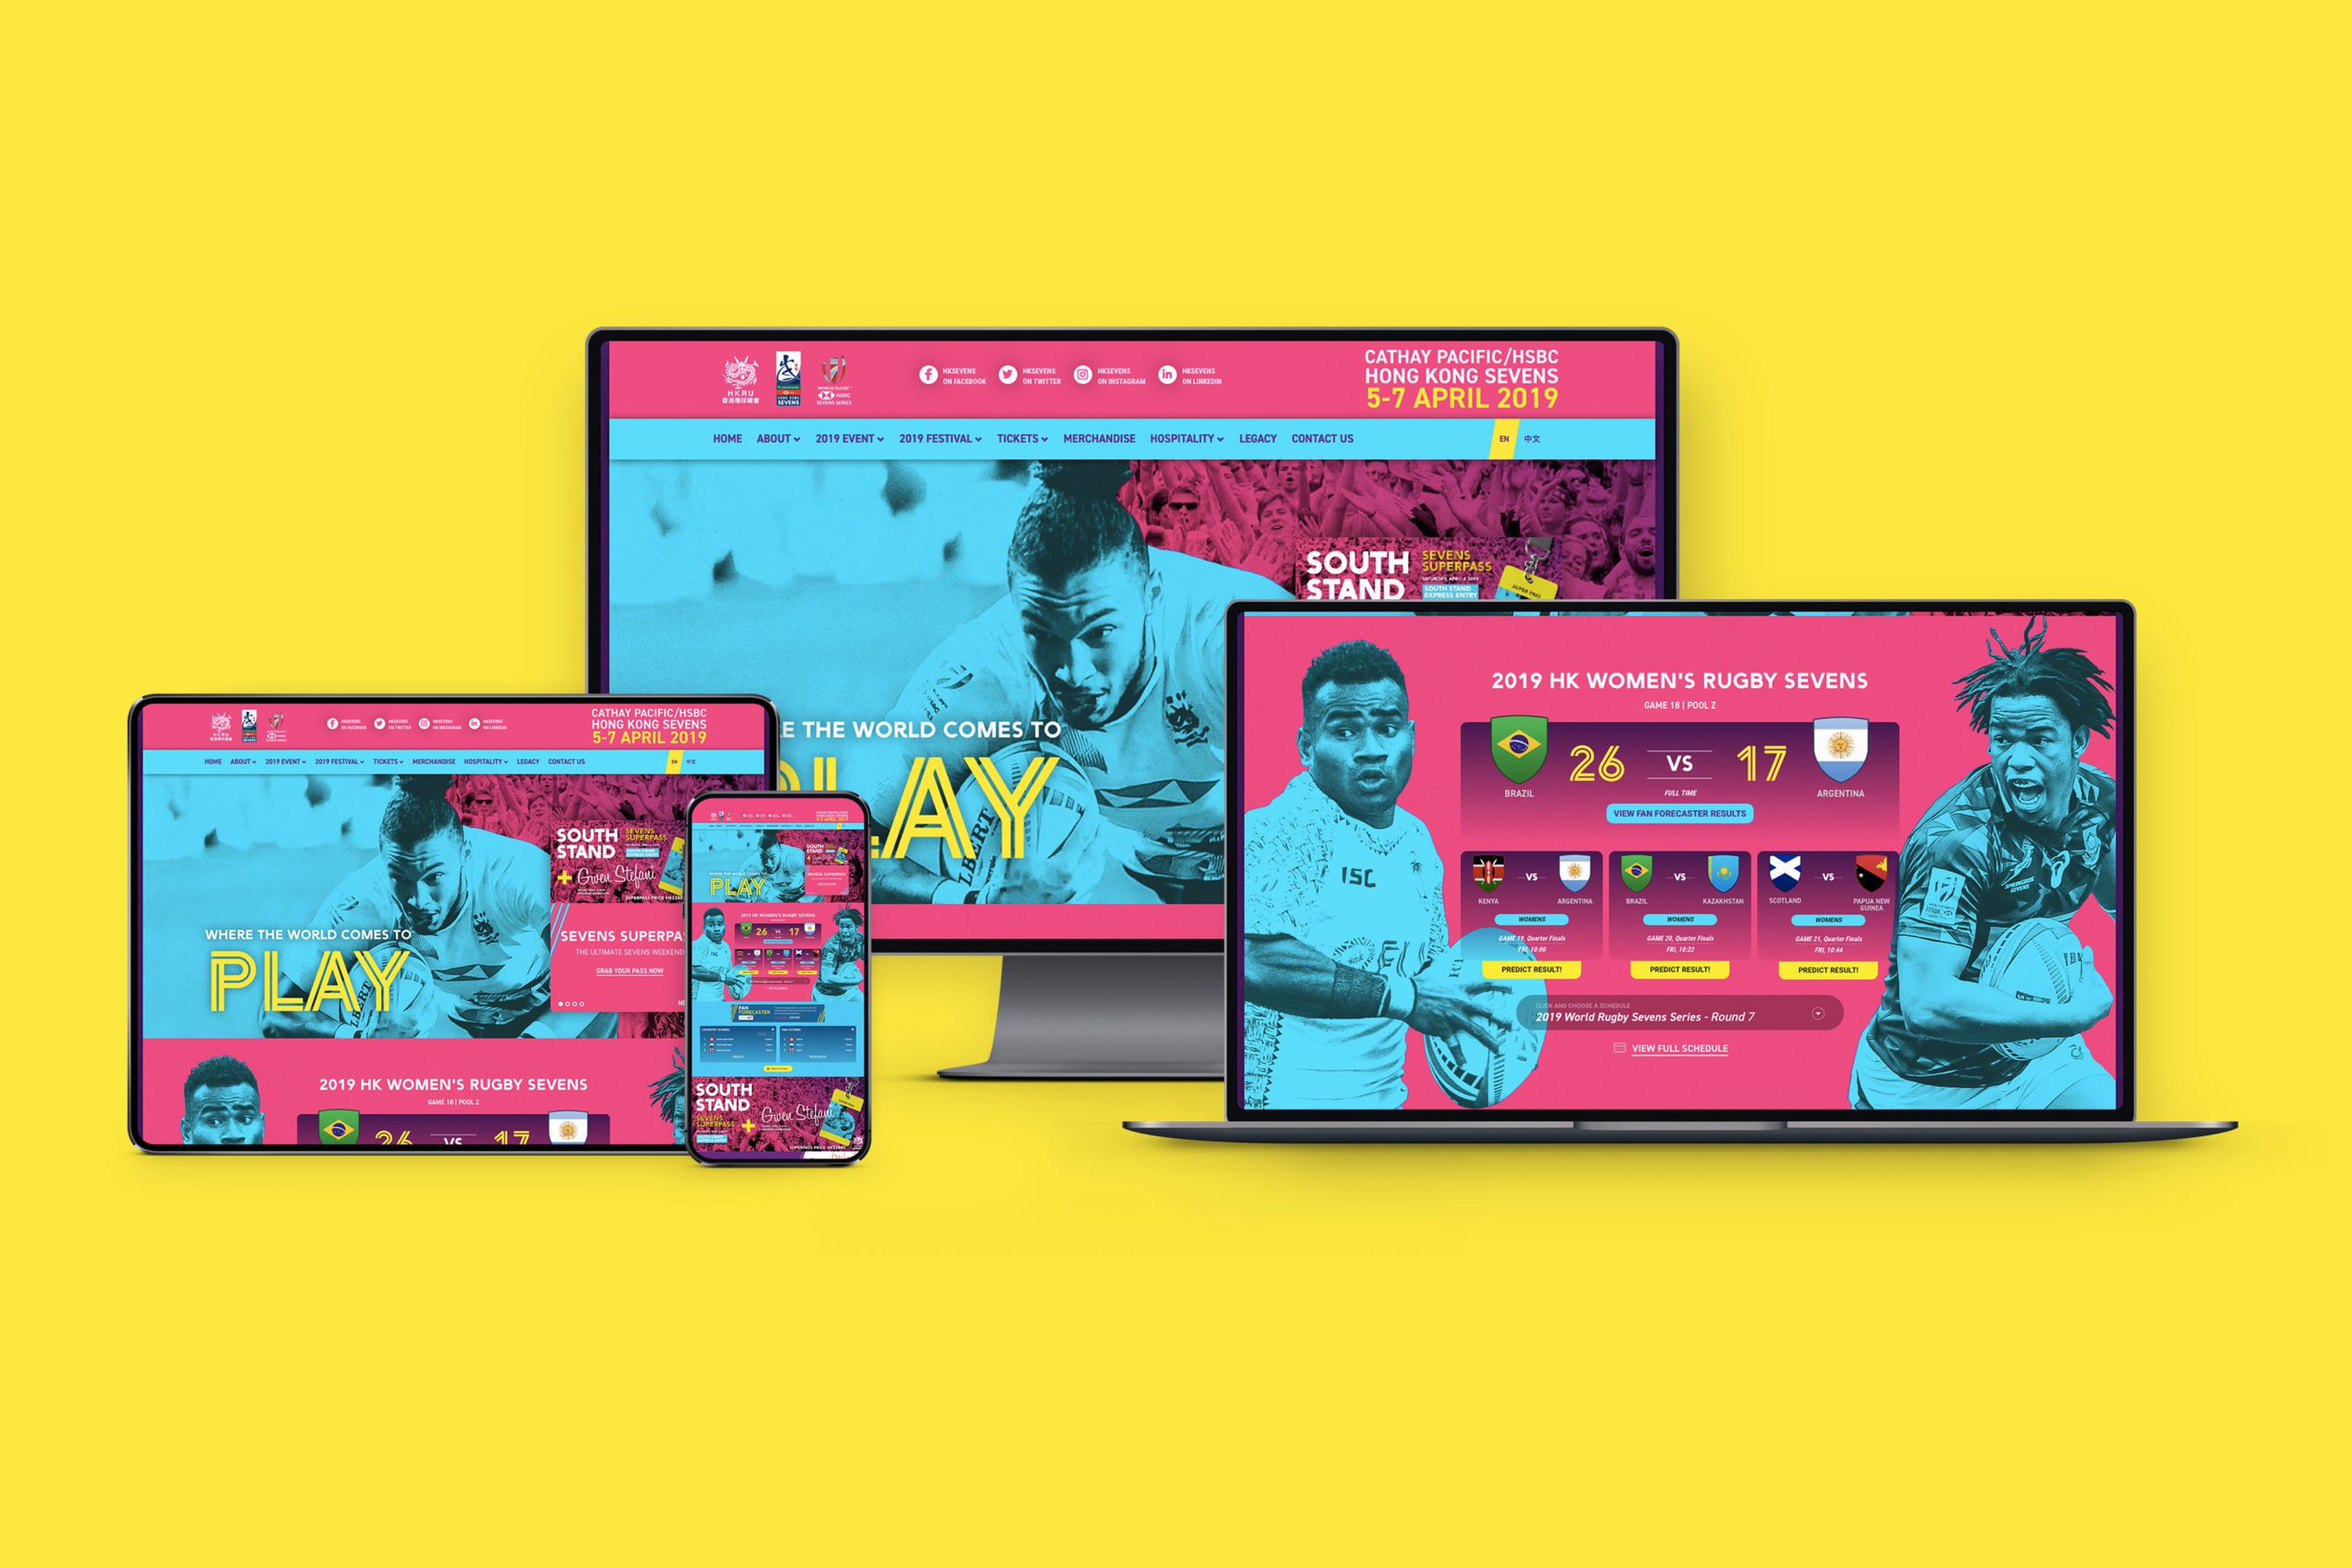 Hong Kong Seven Website shown on various responsive devices on bright yellow background